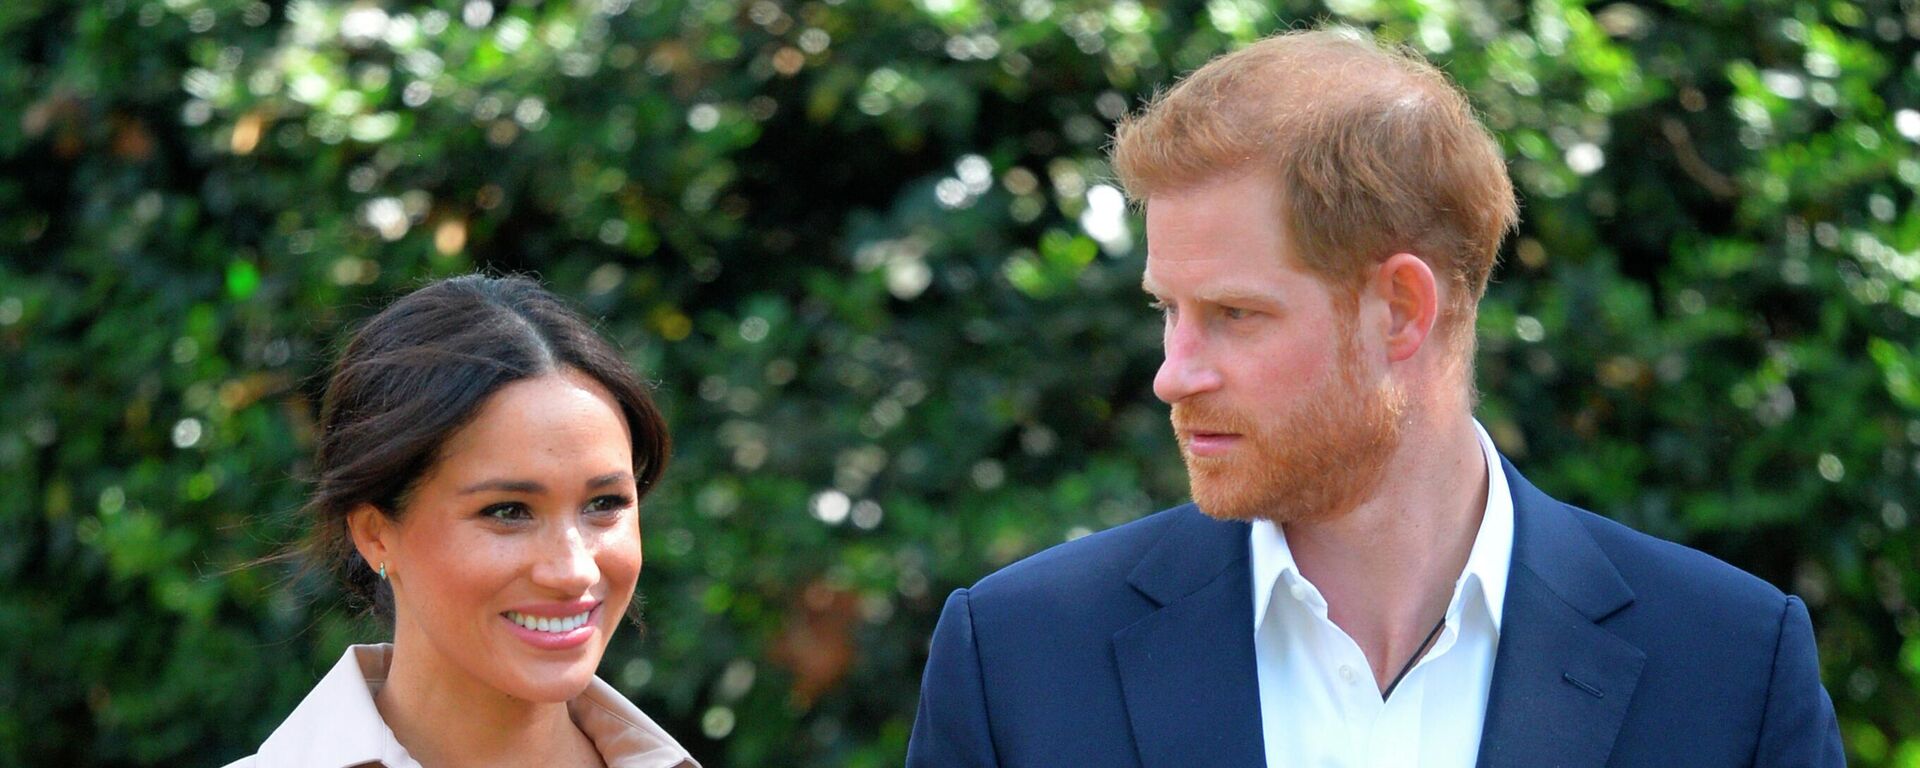 FILE - In this Oct. 2, 2019, file photo, Britain's Prince Harry and Meghan Markle appear at the Creative Industries and Business Reception at the British High Commissioner's residence in Johannesburg.  - Sputnik International, 1920, 30.08.2022